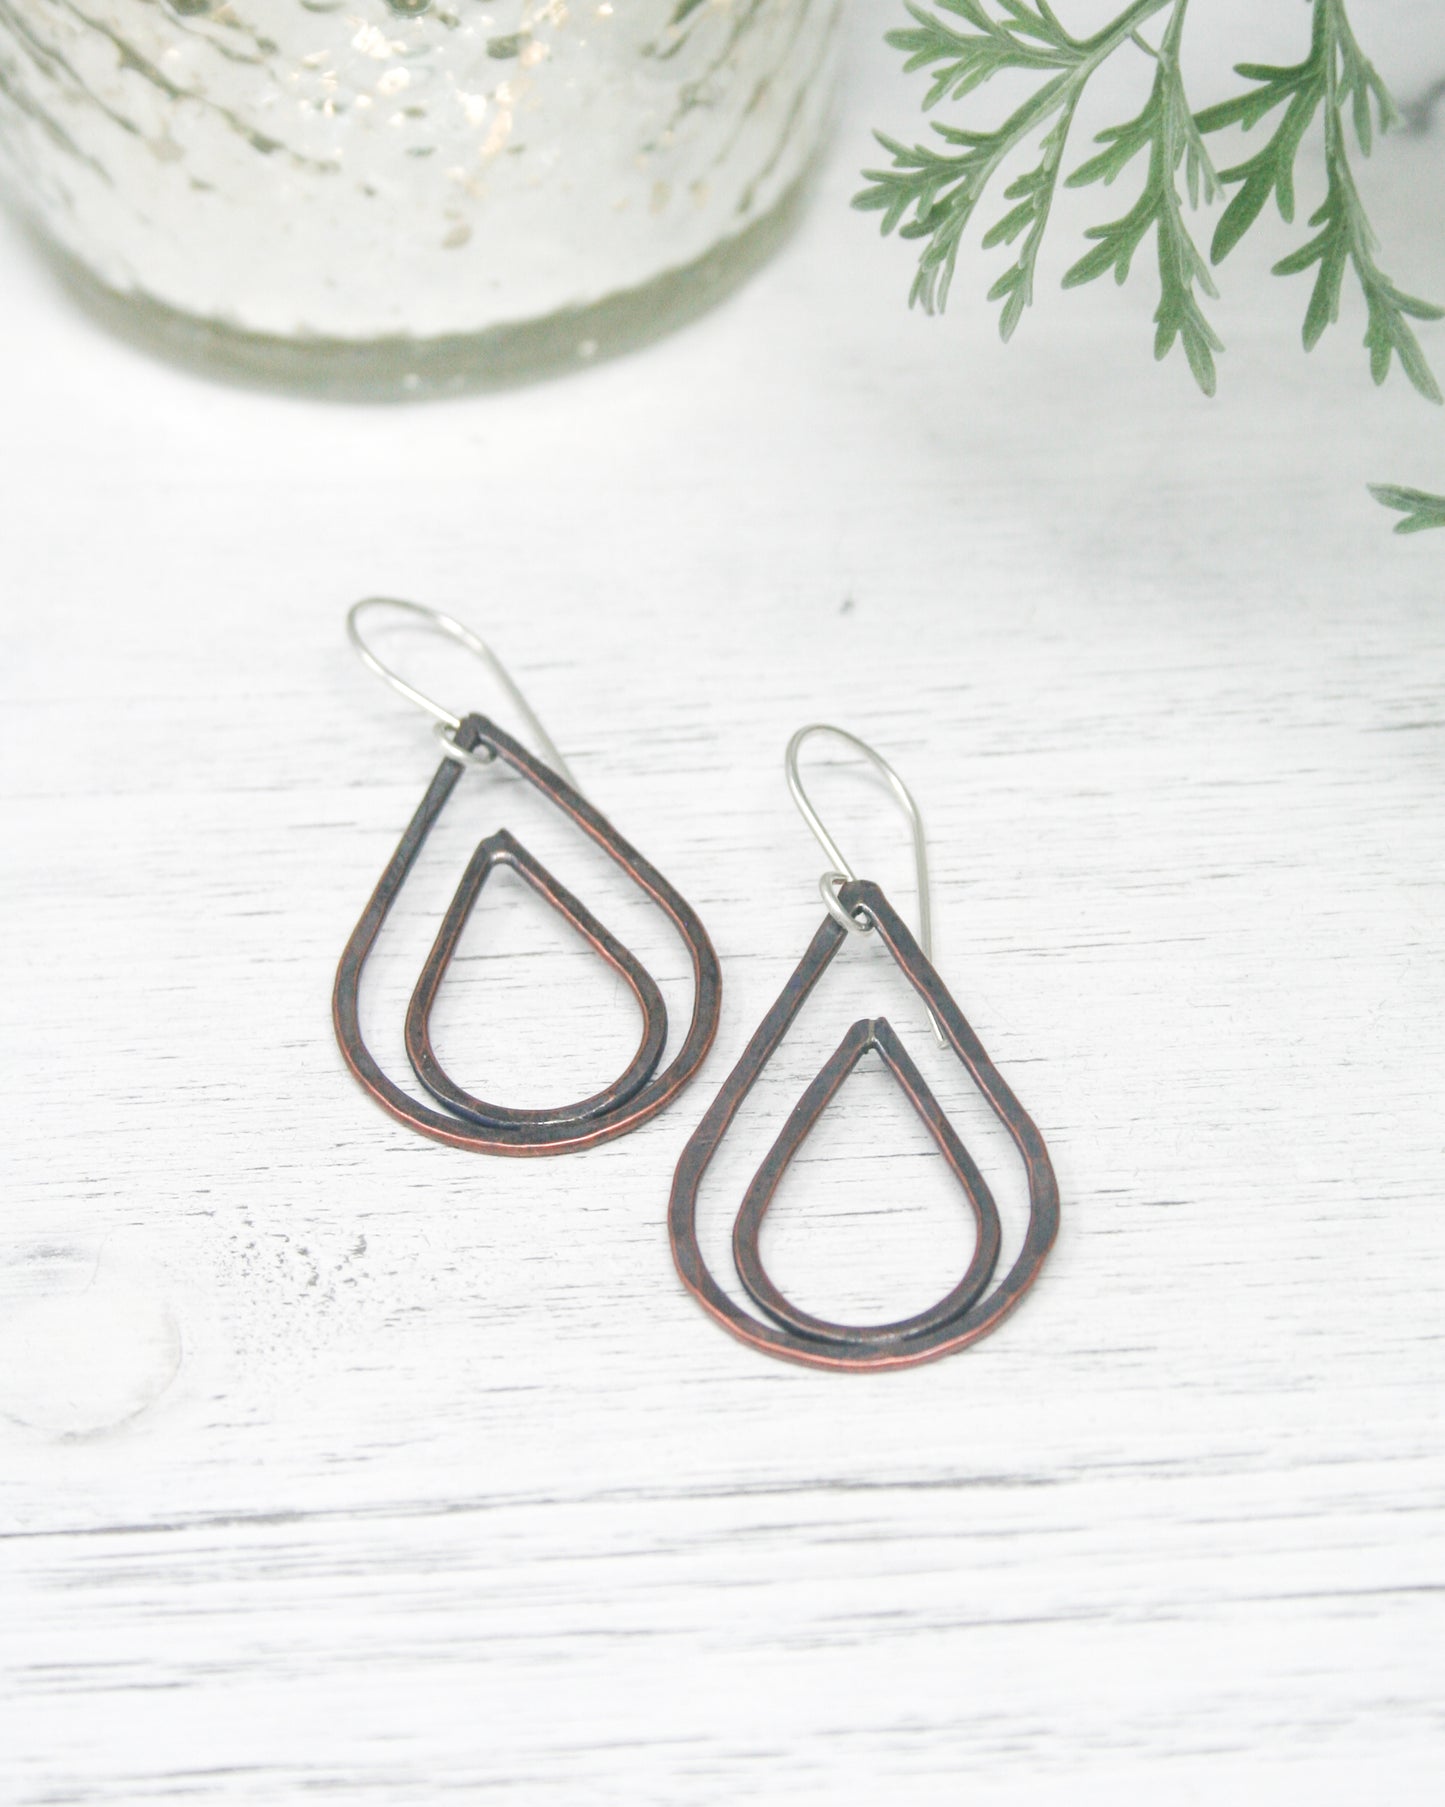 Forged Silhouette Hoop earrings -Dew Drop [ready to ship]